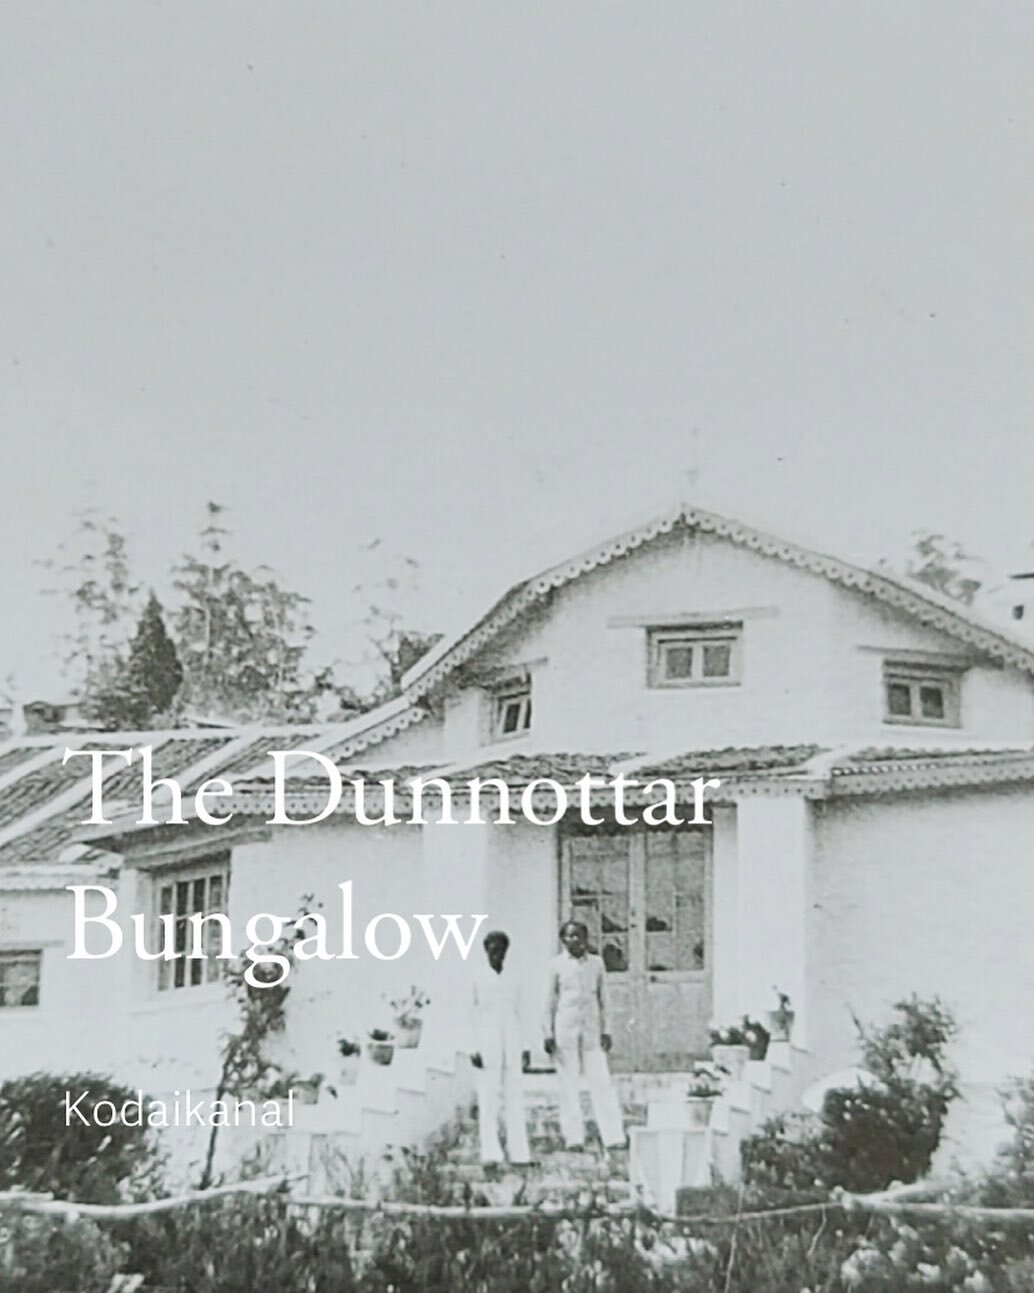 This day 74 years ago on AUGUST 12, 1947 &hellip;&hellip; 
The story of our bungalow started precisely today 74 years ago on August 12, 1947 when our home The Dunnottar came into our family when a Scotsman by the name of Lord Chamberlain sold the bun